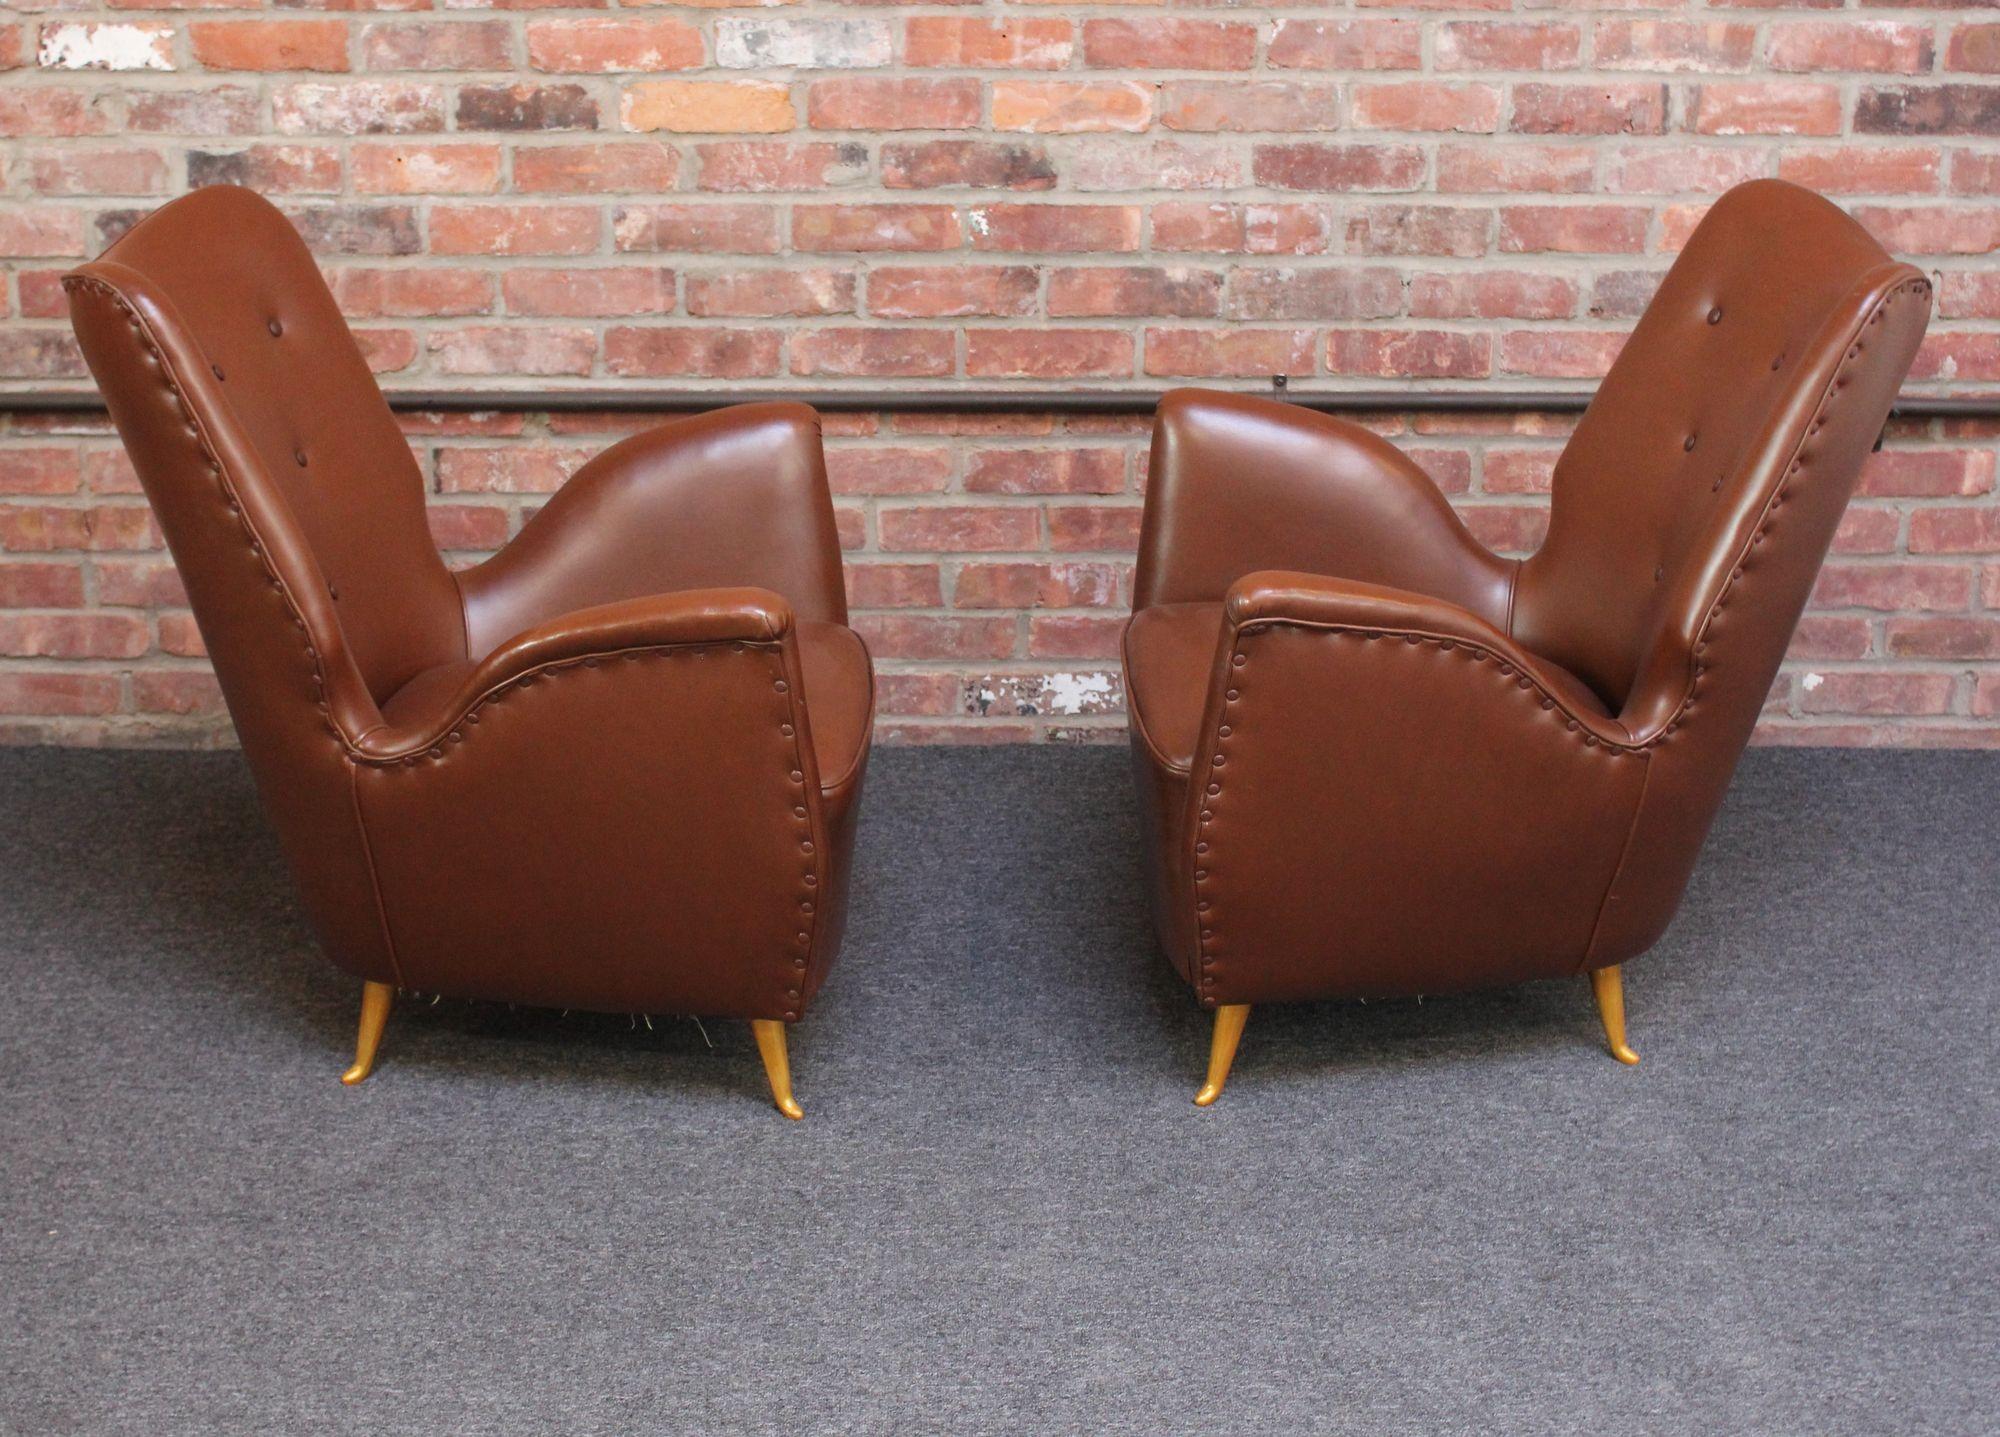 Italian Pair of Isa Bergamo Sculptural Petite Club Chairs Attributed to Gio Ponti For Sale